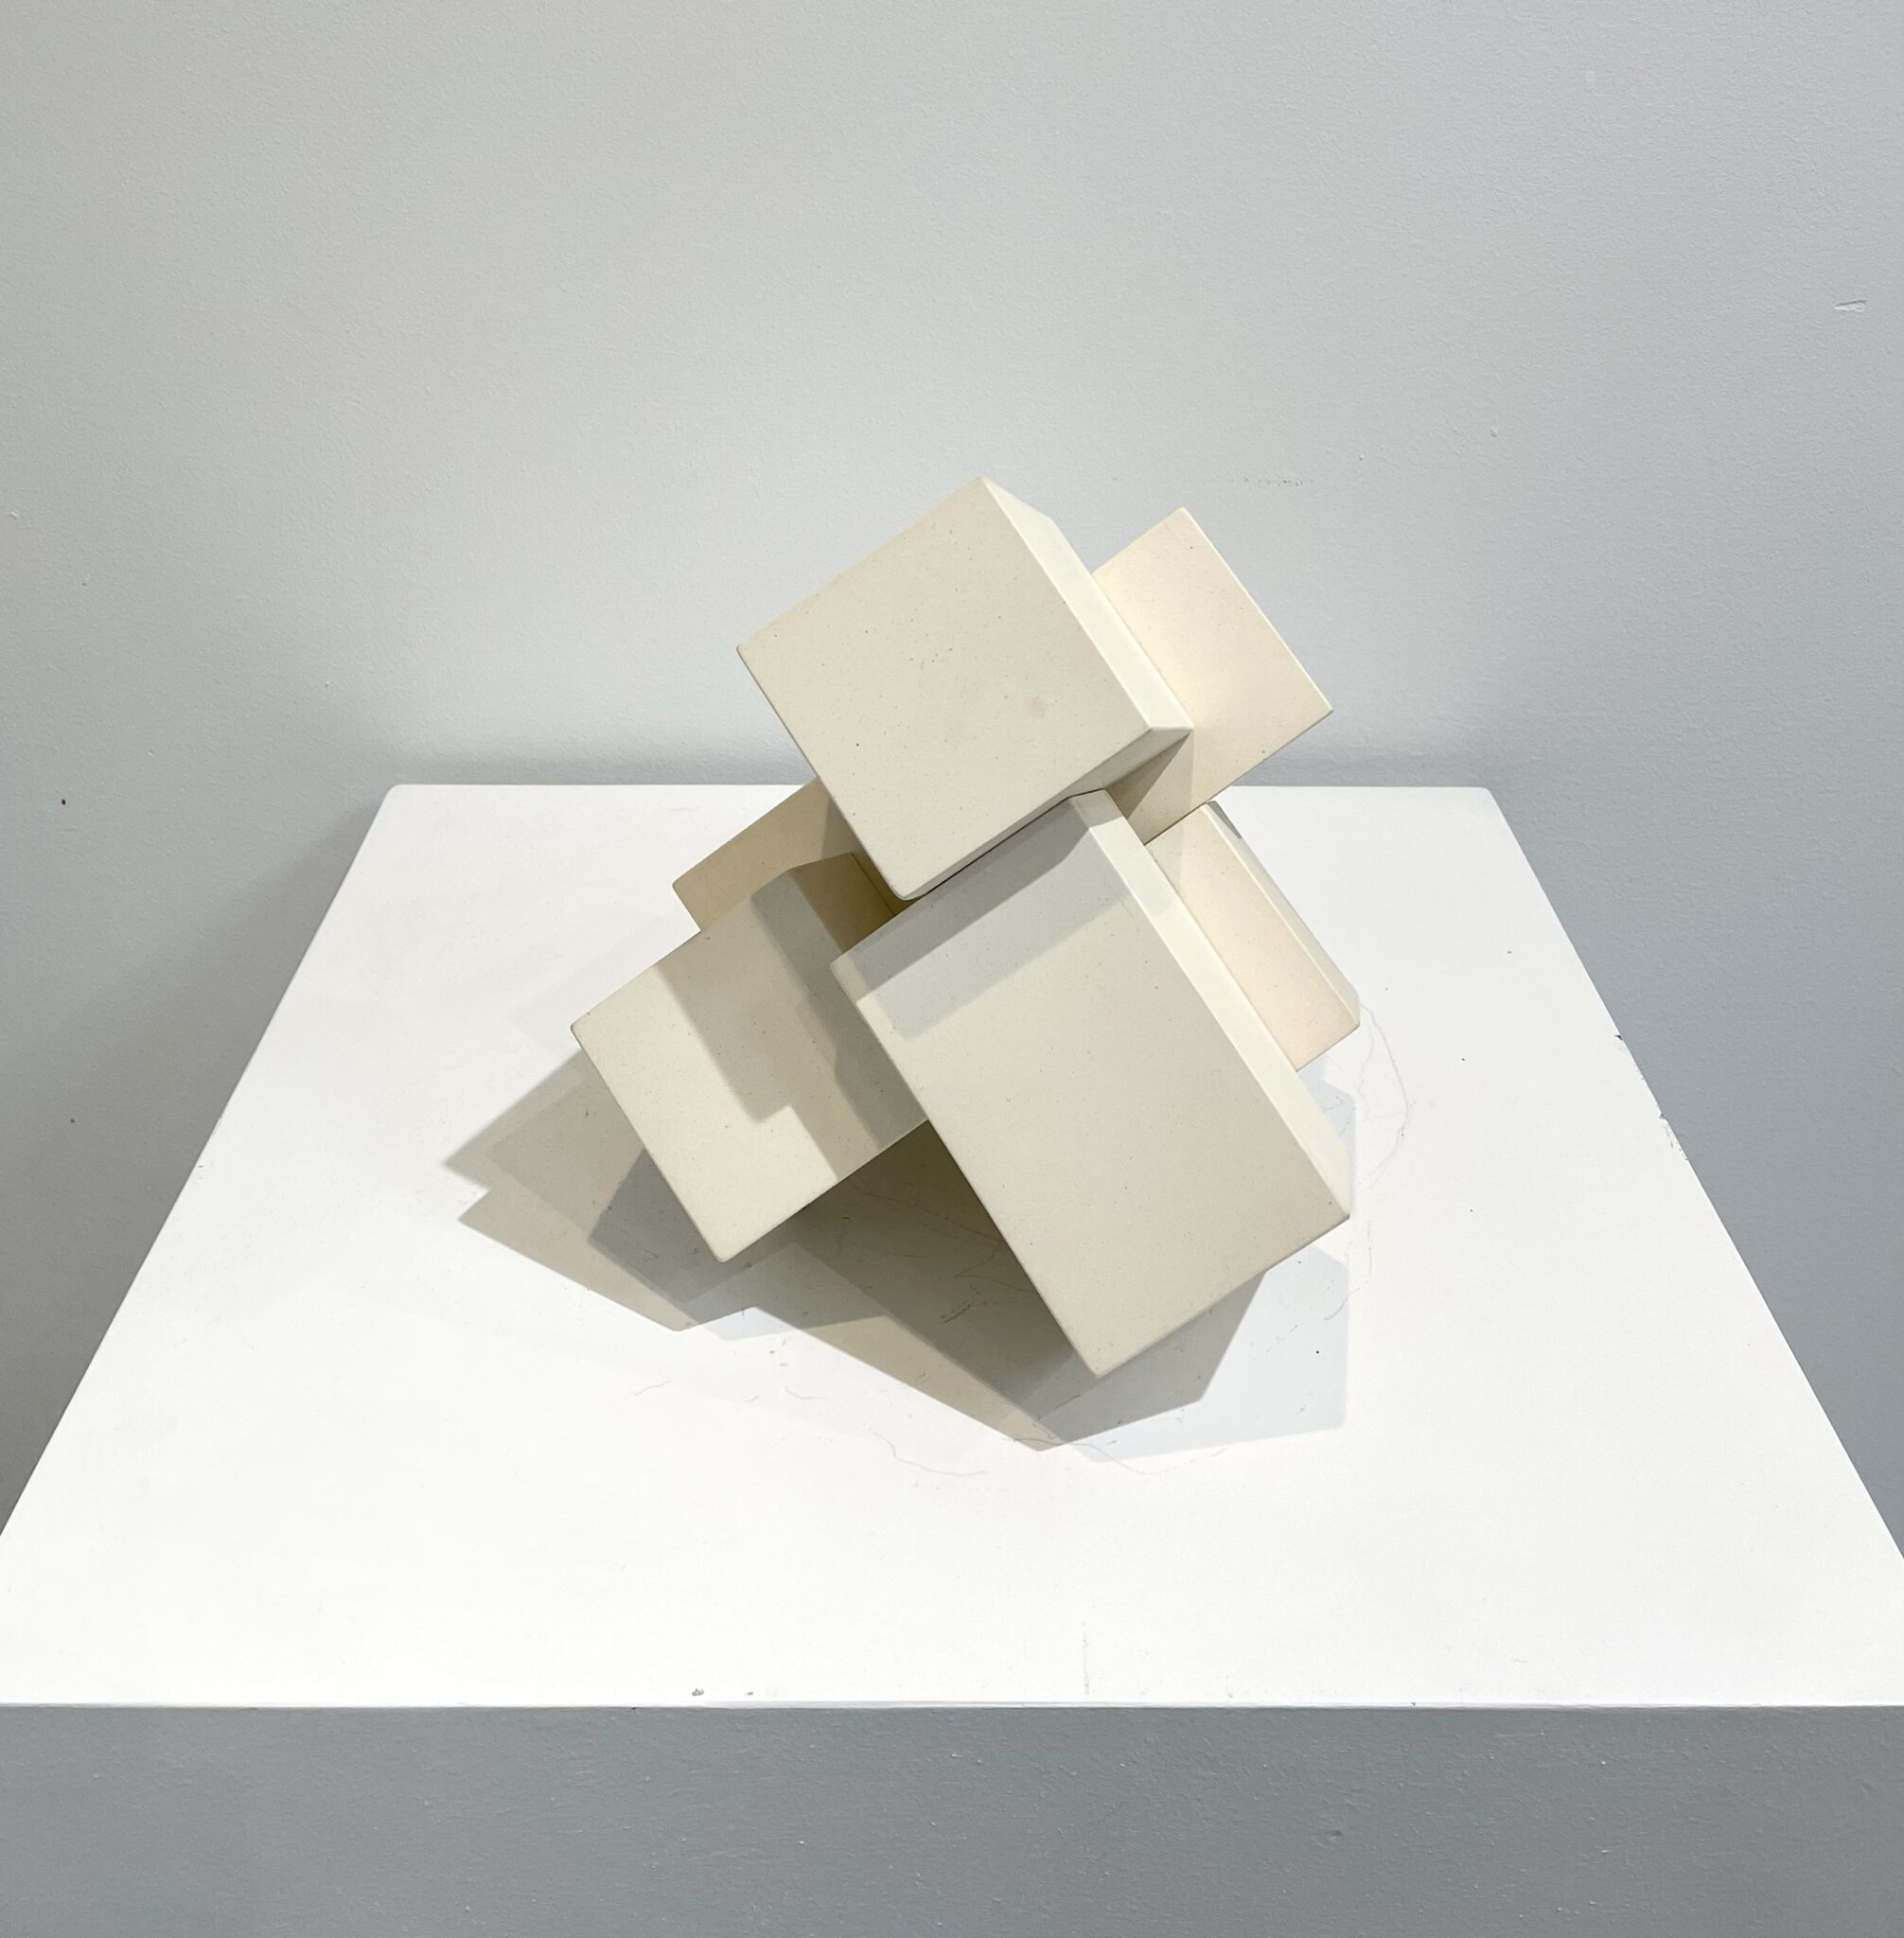 Chris Kelly "CGR 15," Ceramic 10” x 10” x 10” 2023, on view at The Lucore Art gallery